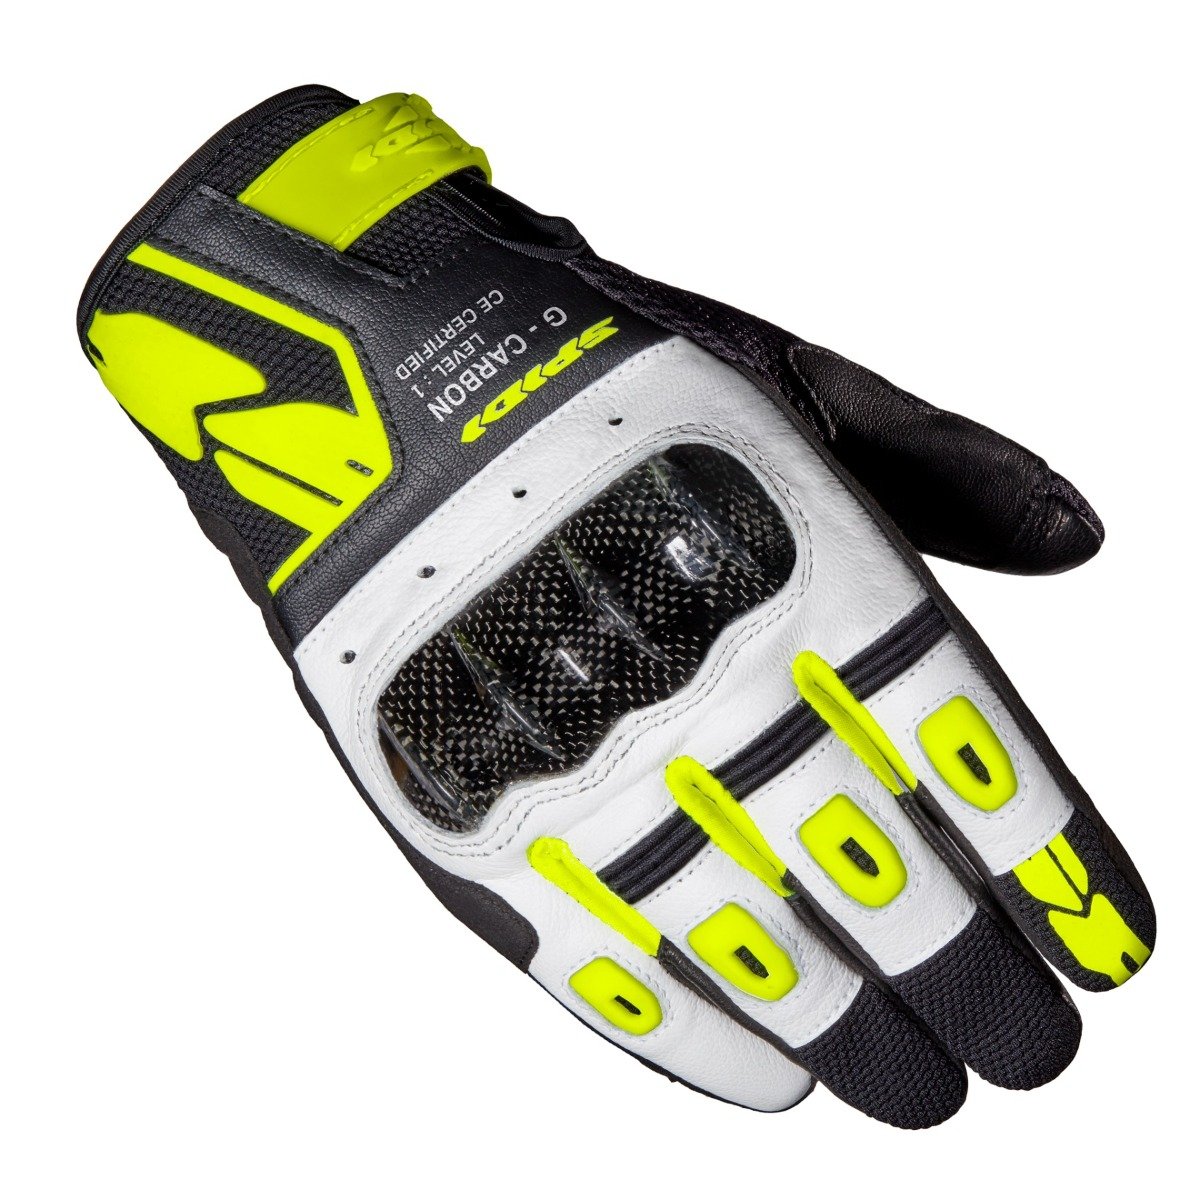 Image of Spidi G-Carbon Black Fluo Yellow Size 2XL ID 8030161314908